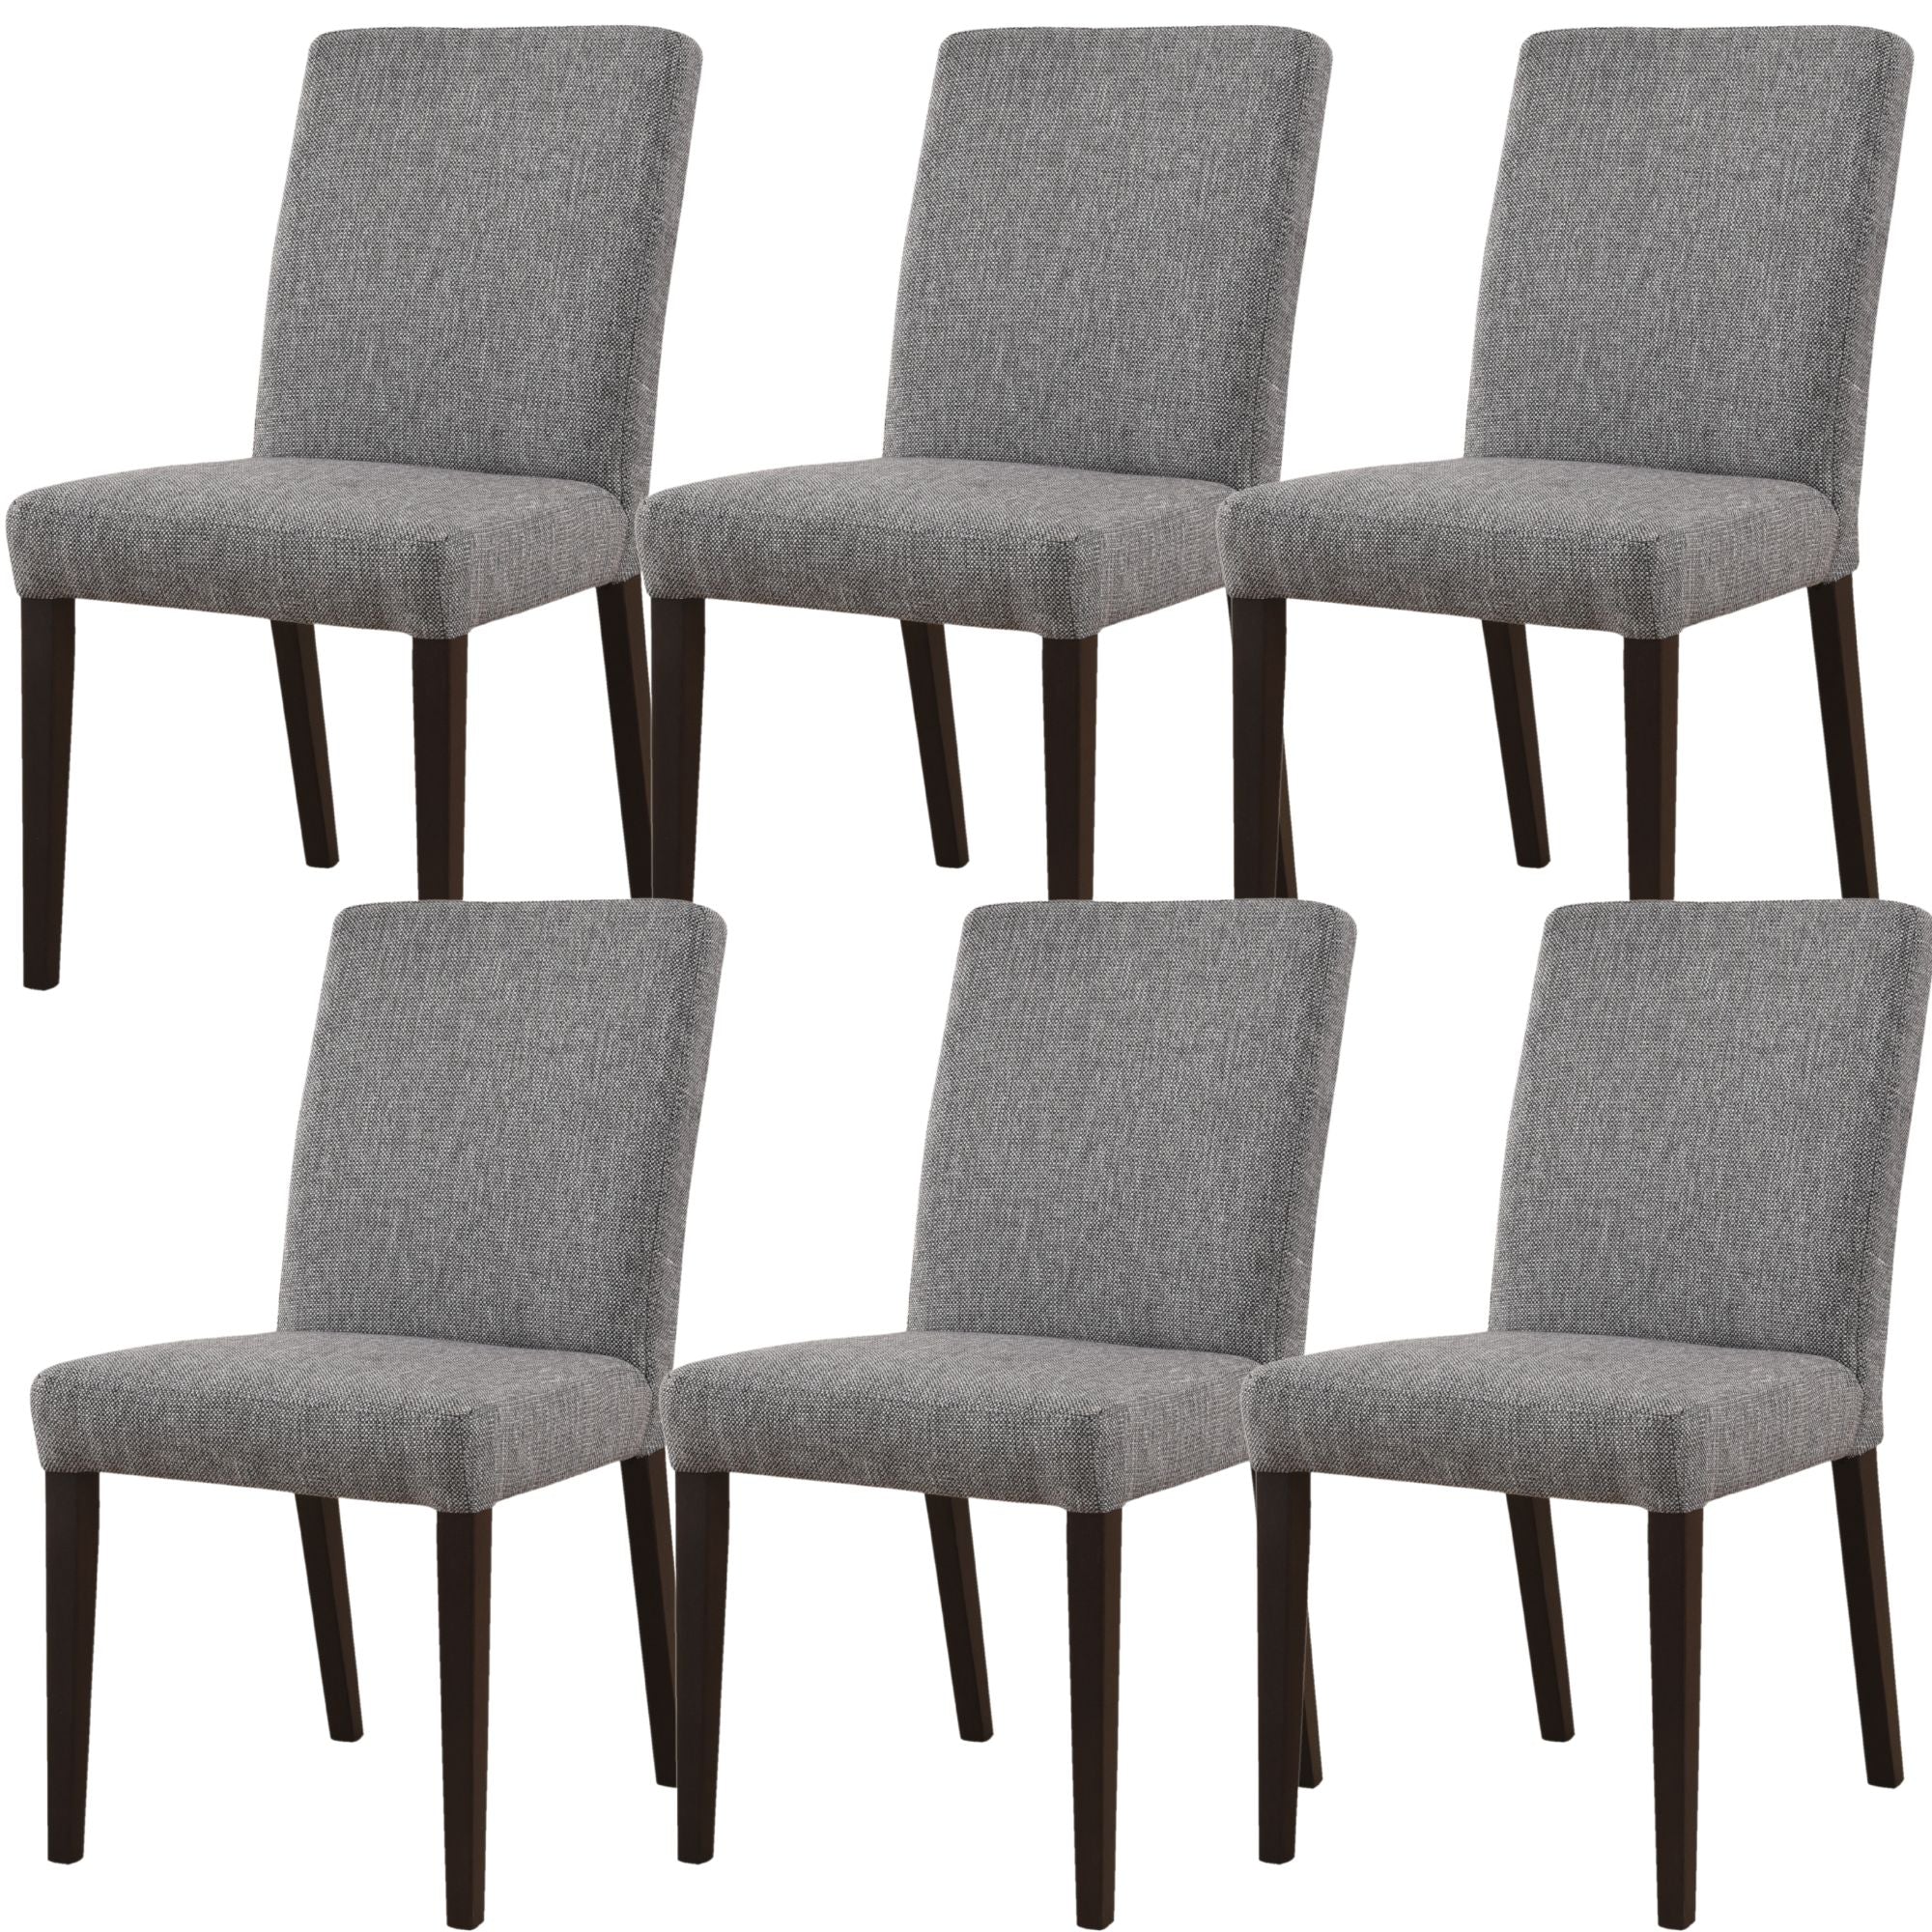 Dining Chair Set of 6 Fabric Upholstered Solid Acacia Wood - Granite